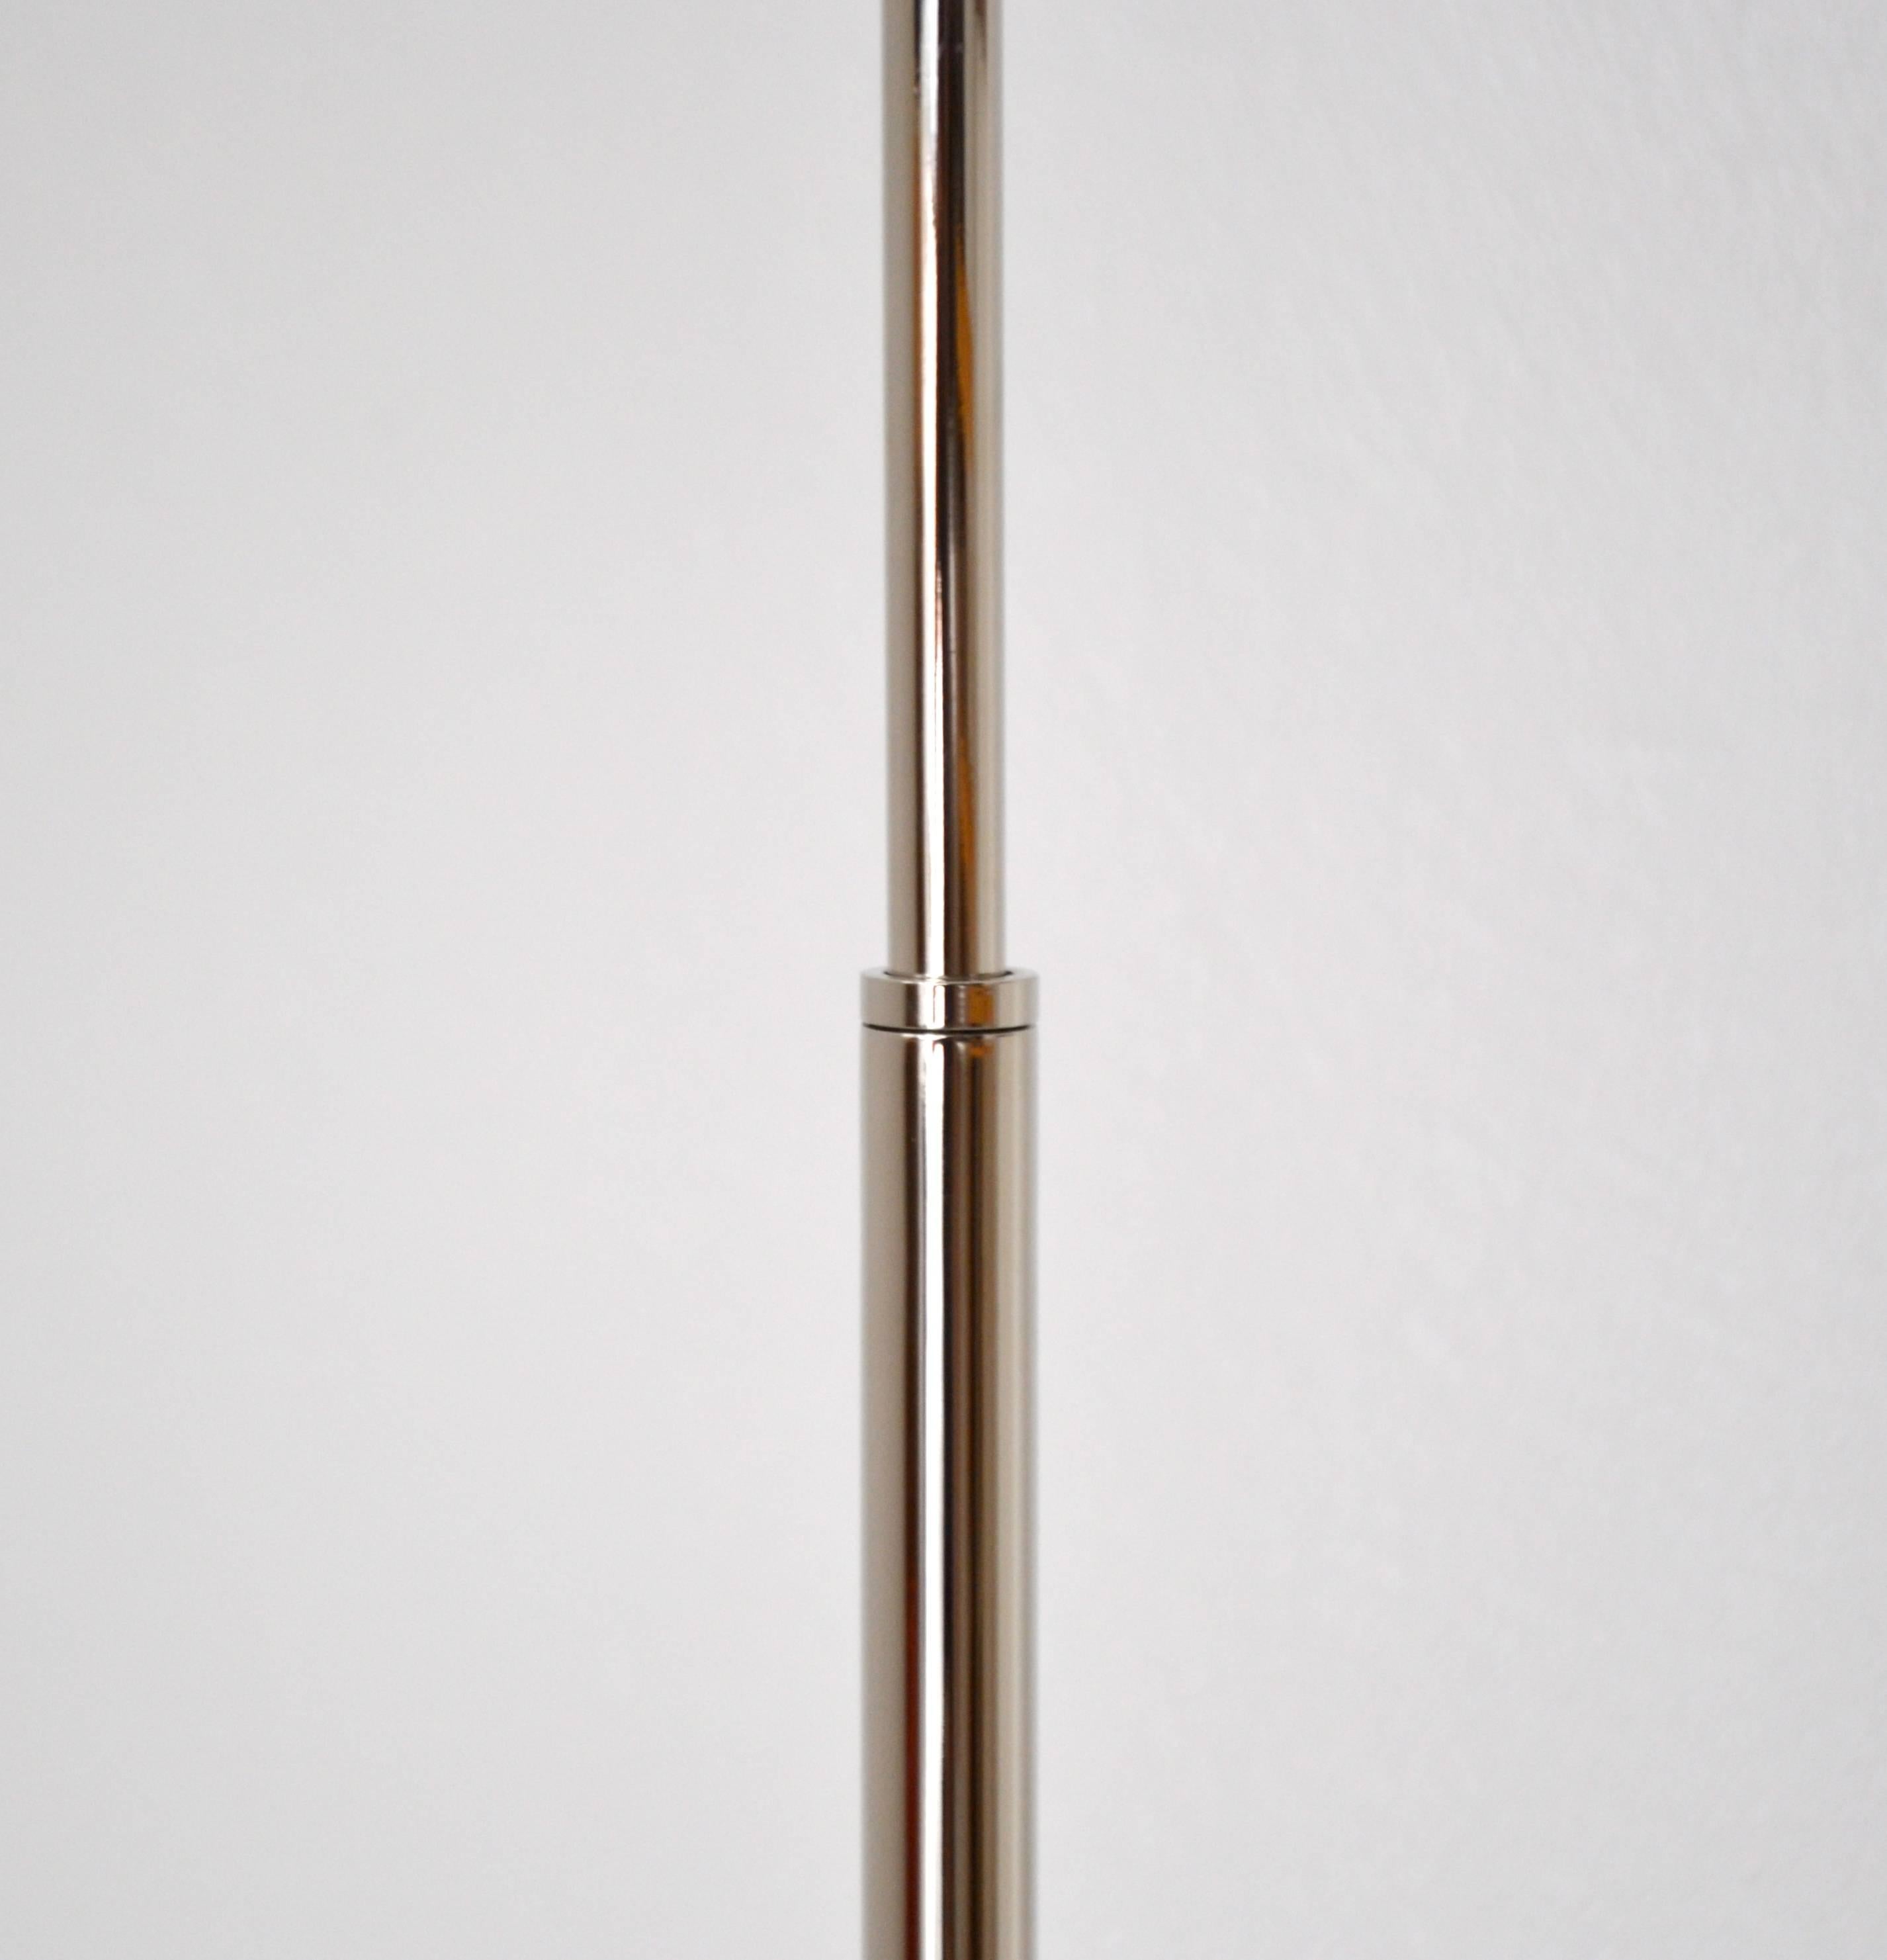 Late 20th Century Midcentury Polished Chrome Articulating Floor Lamp